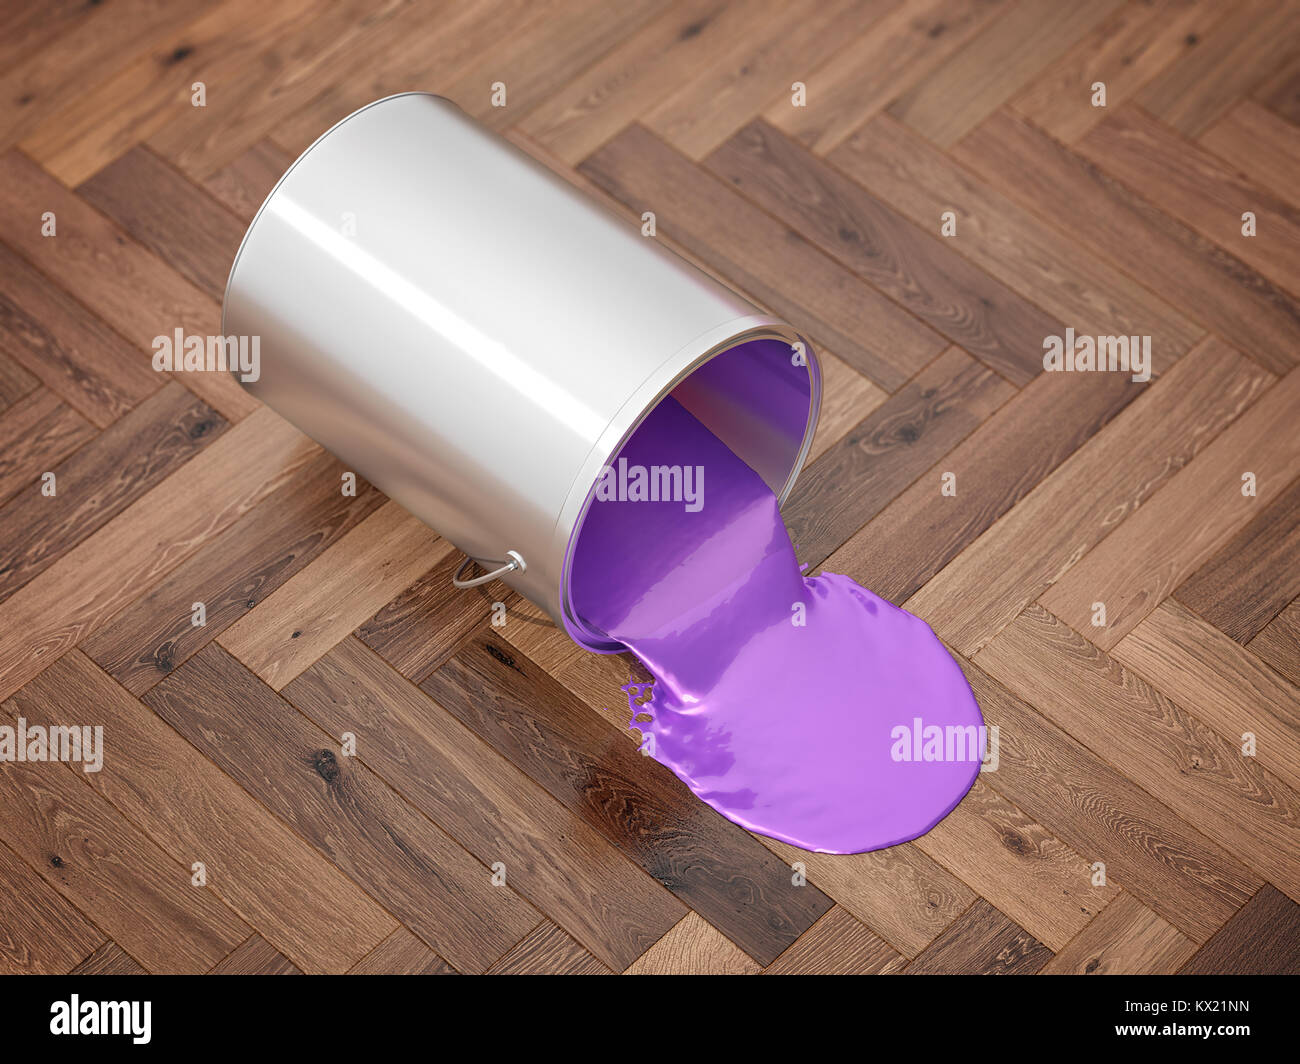 3,803 Spilled Paint Can Images, Stock Photos, 3D objects